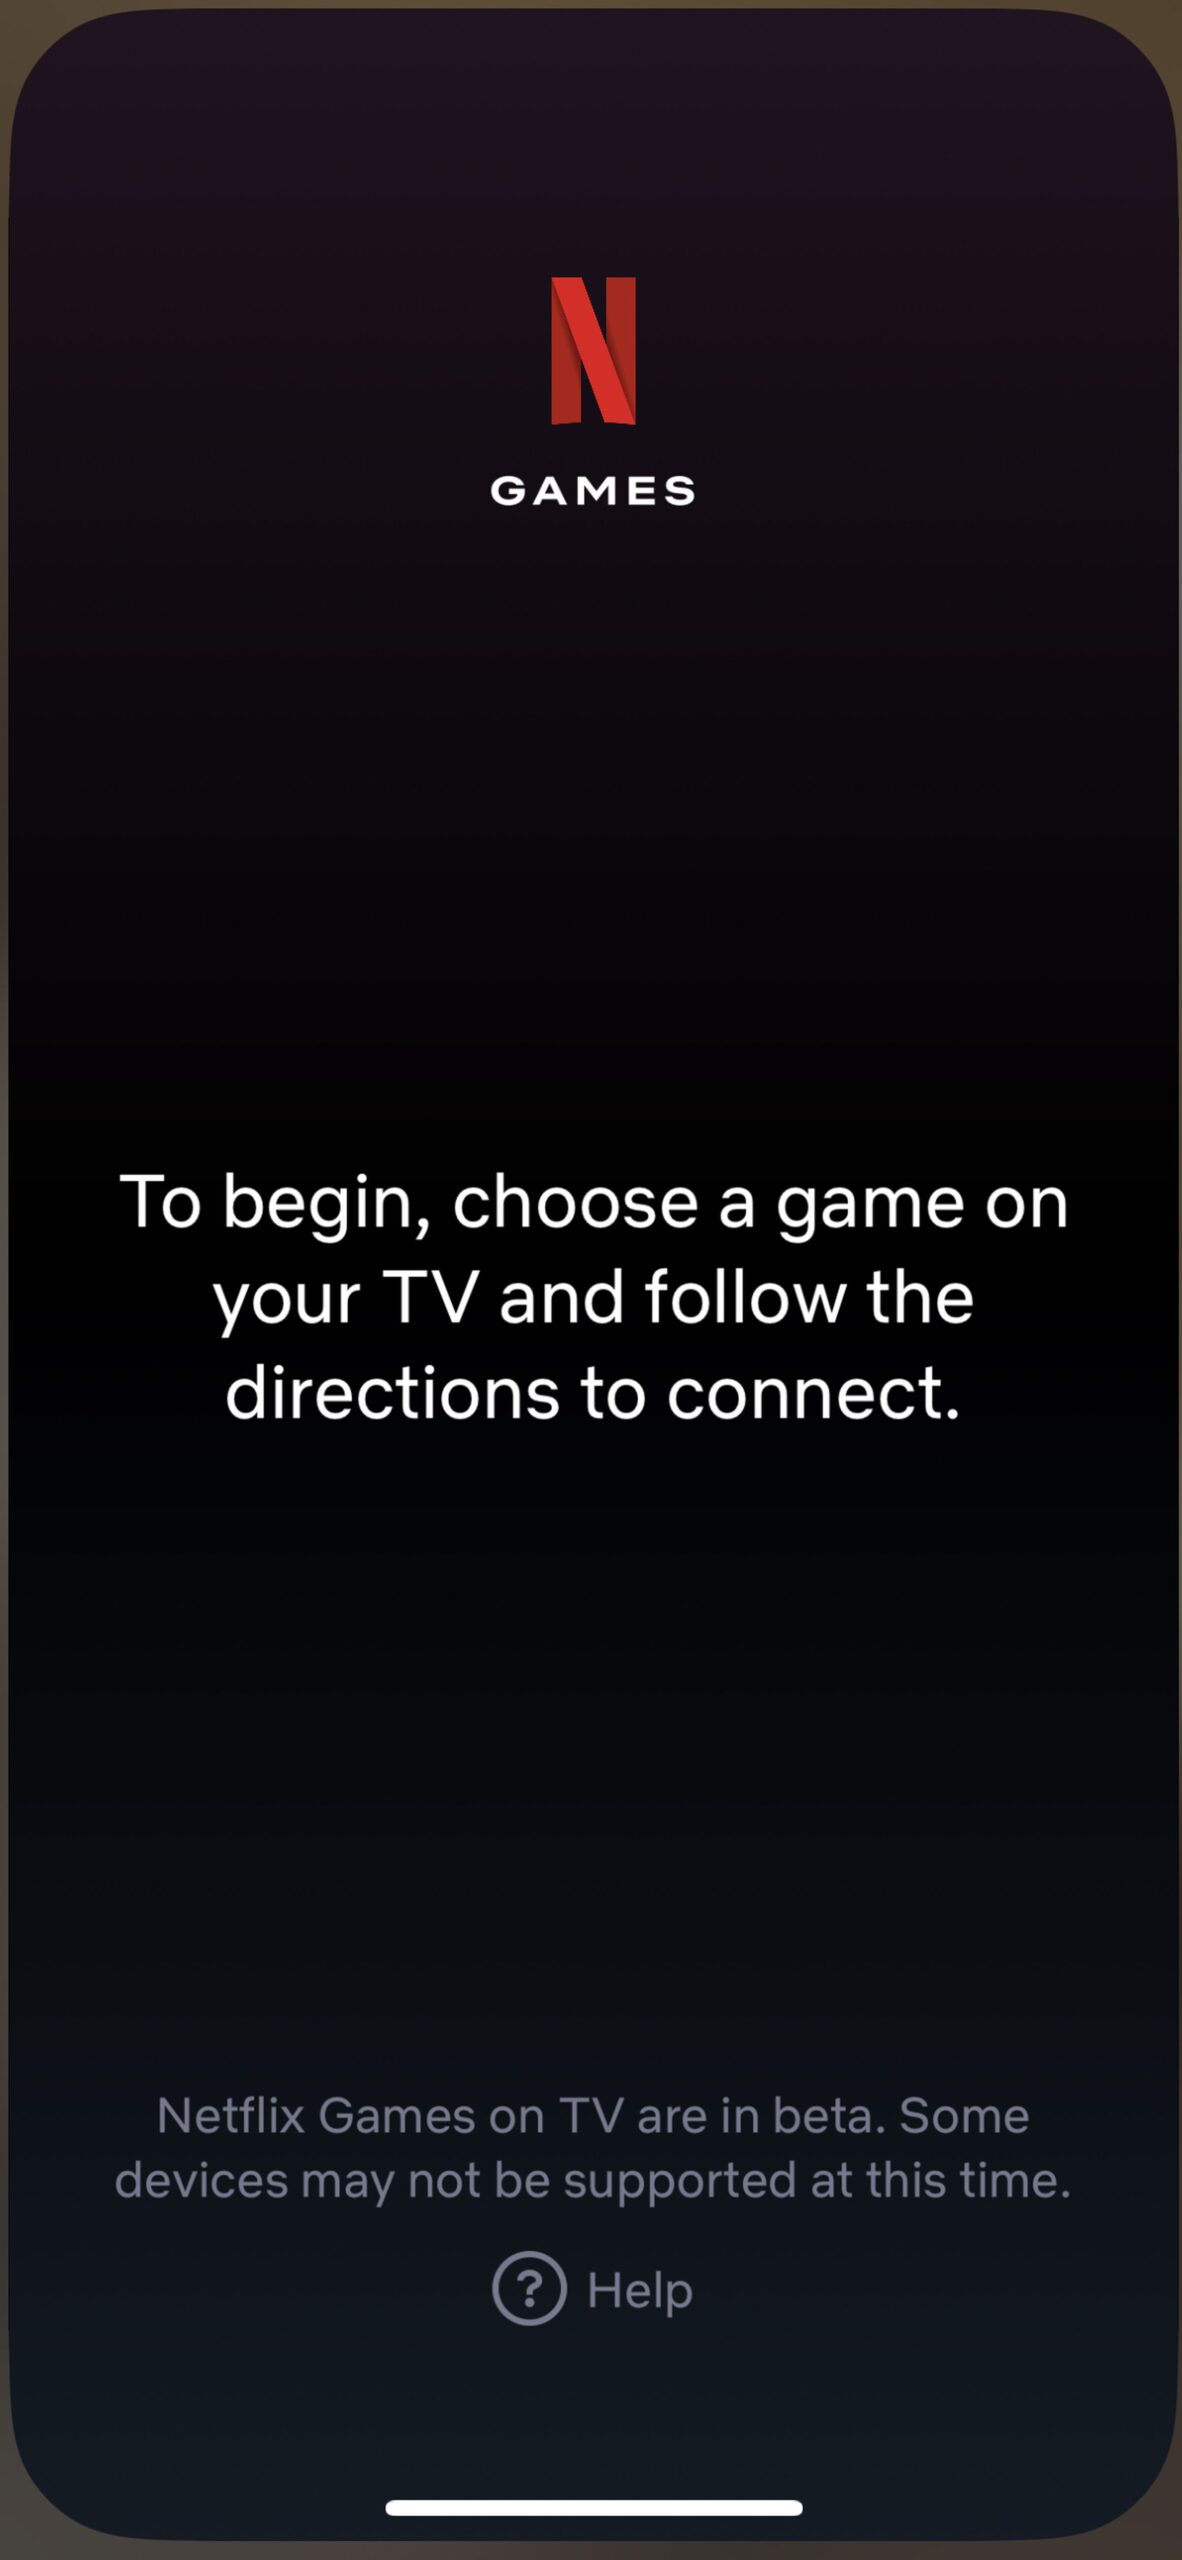 screenshot of the Netflix remote app, says games on tv is in beta and to choose a game on your tv and follow directions.